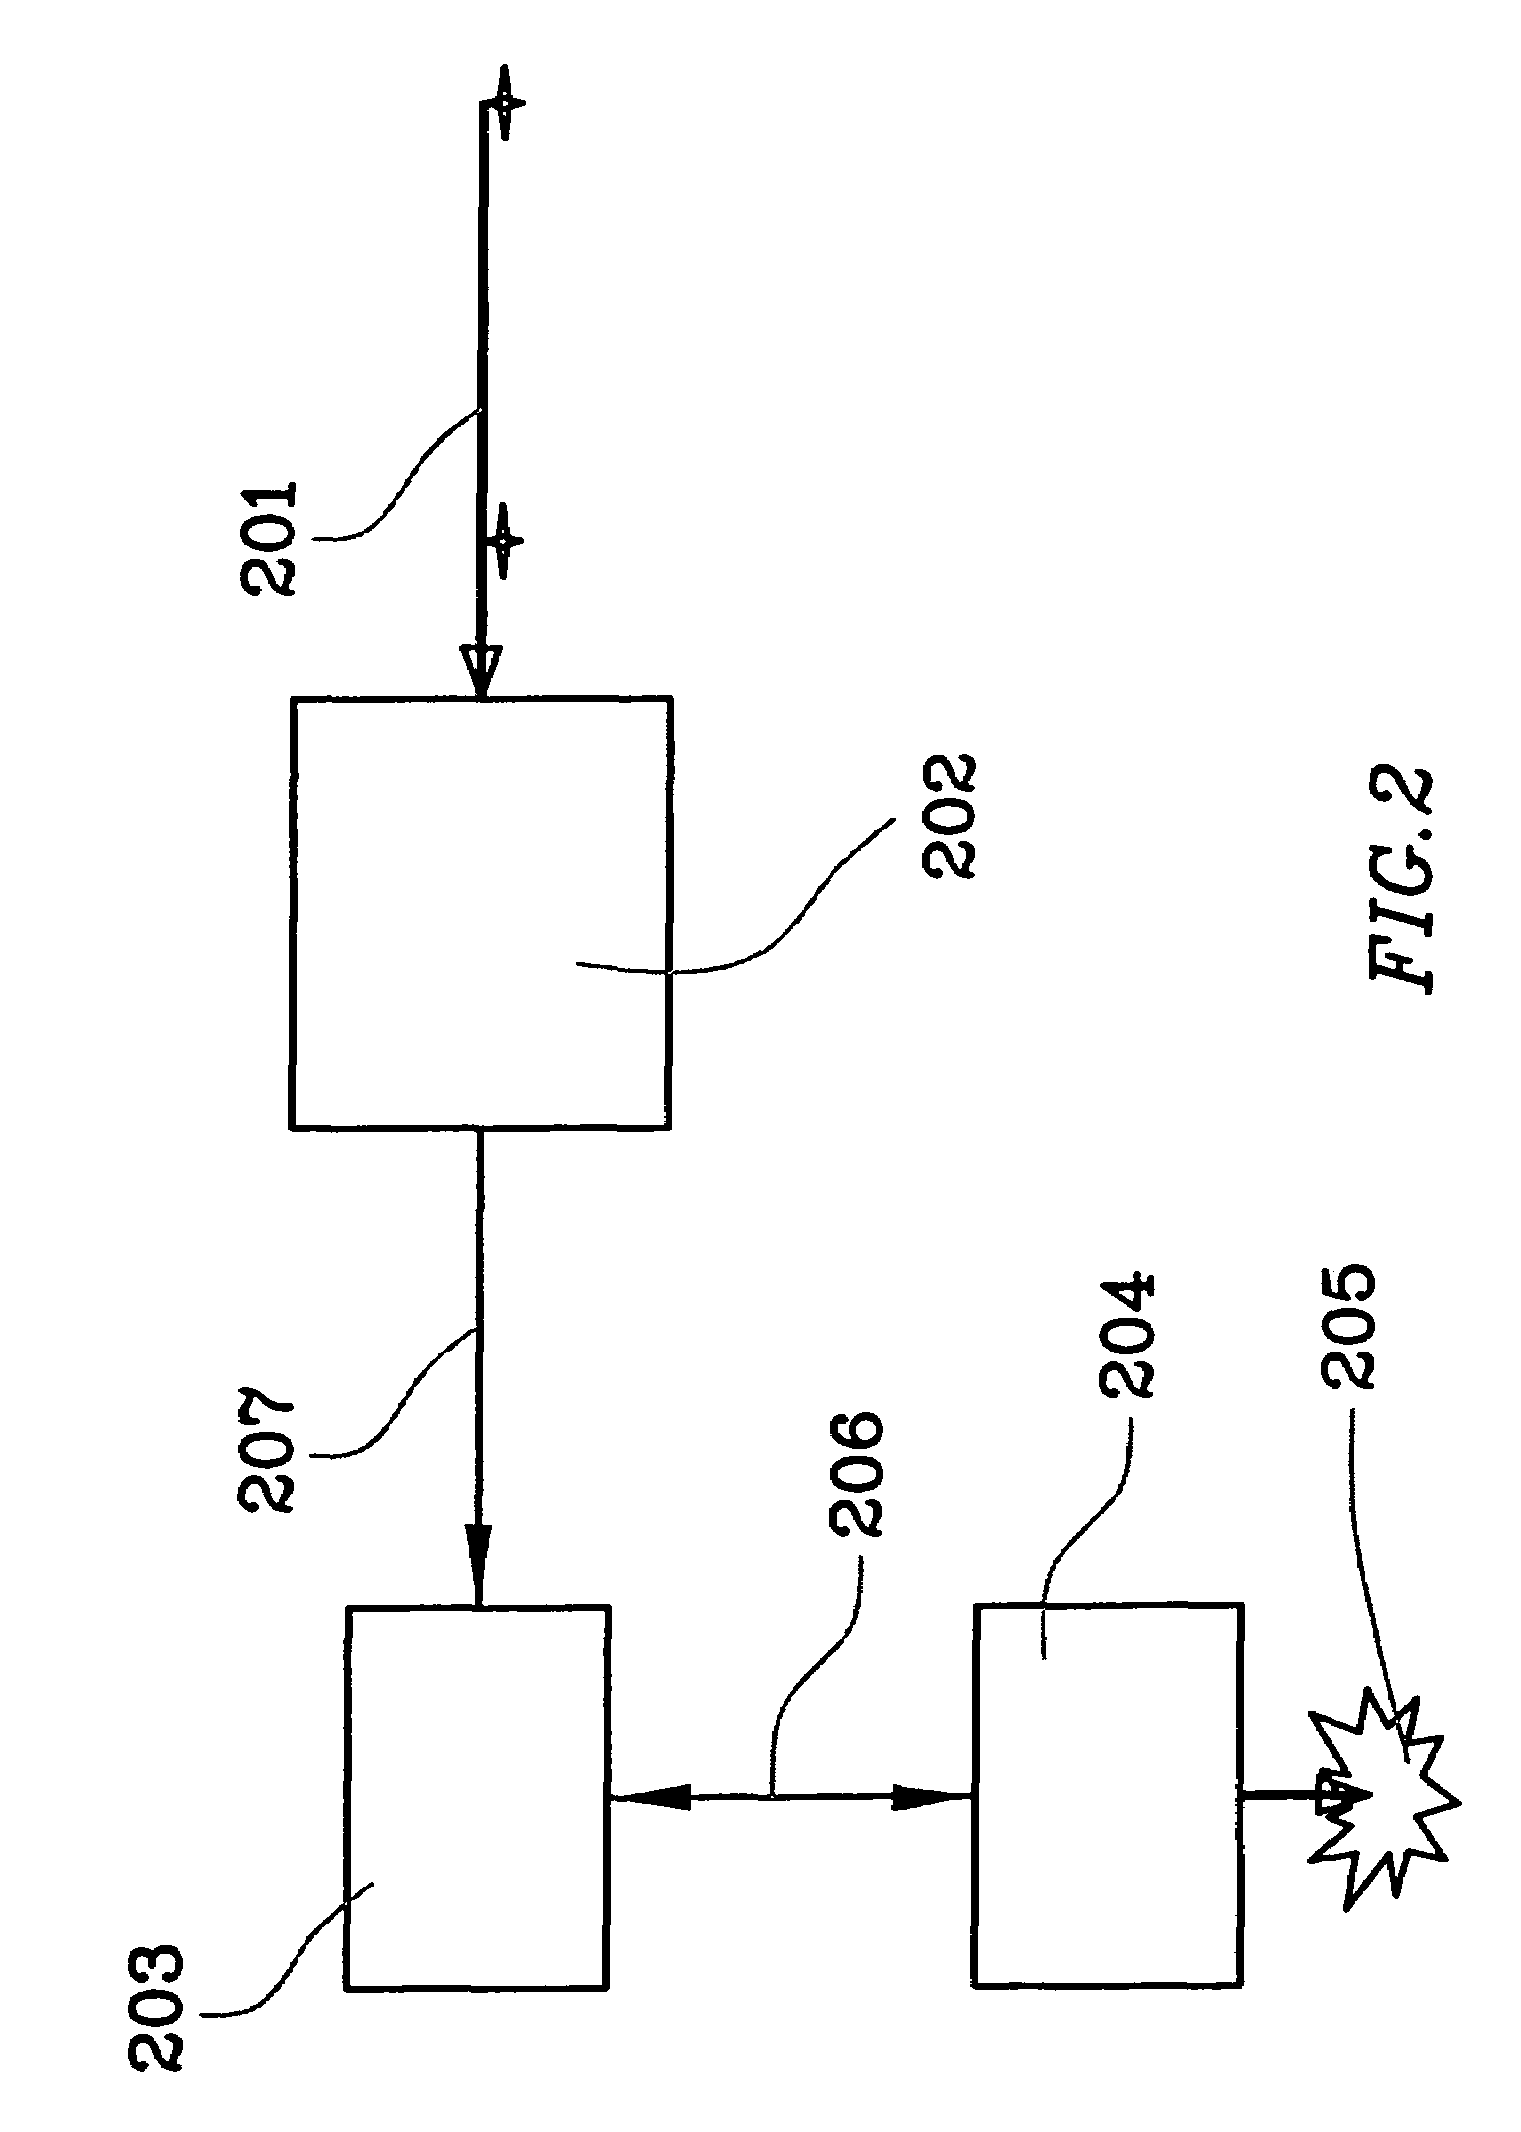 System for geophysical prospecting using induce electrokinetic effect